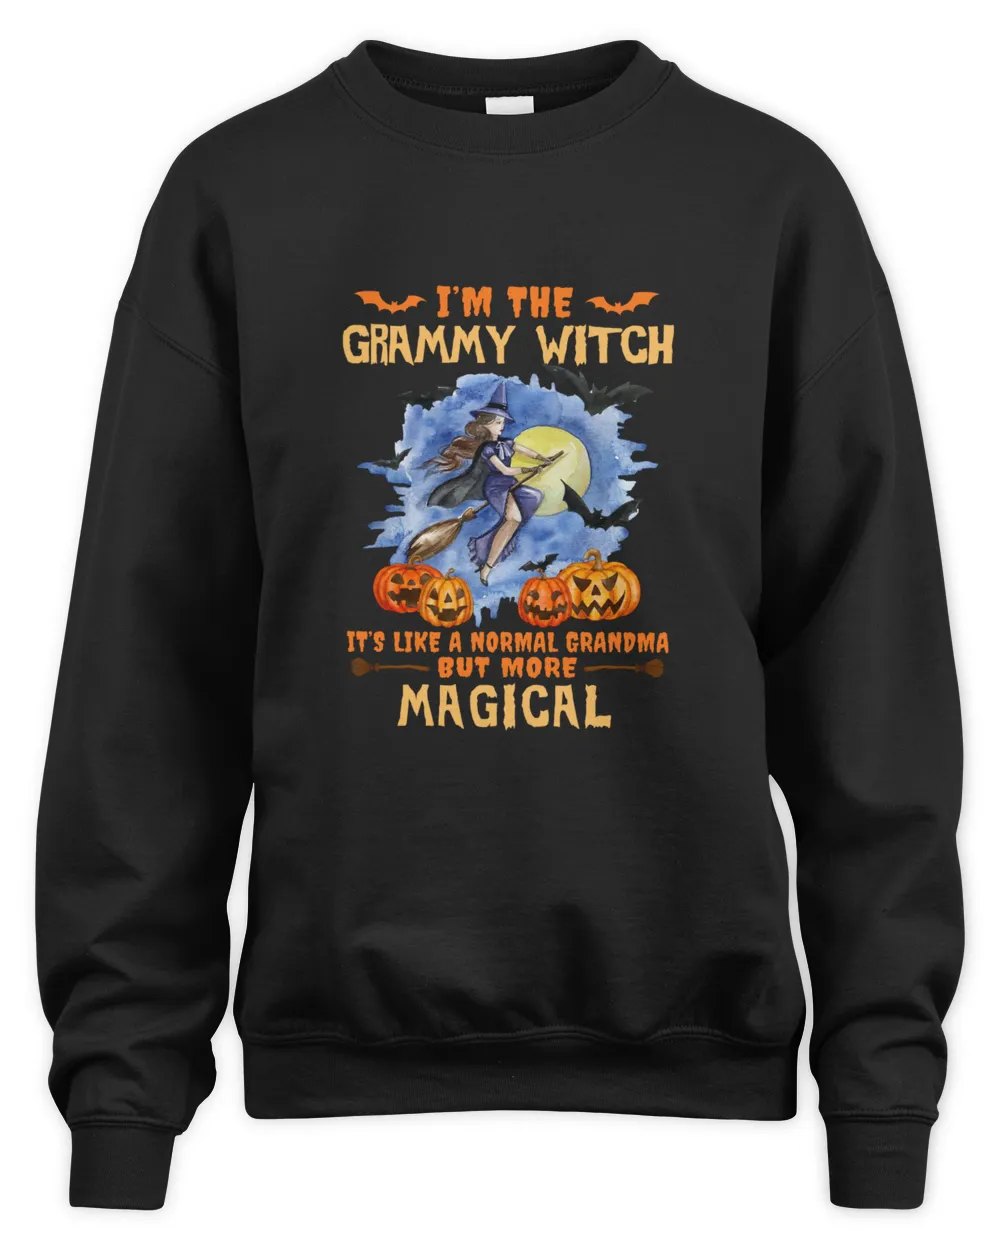 I'm the Grammy witch it's like a normal grandma but more magical, demon bats witch riding broom pumpkin Women's Premium Slim Fit Tee